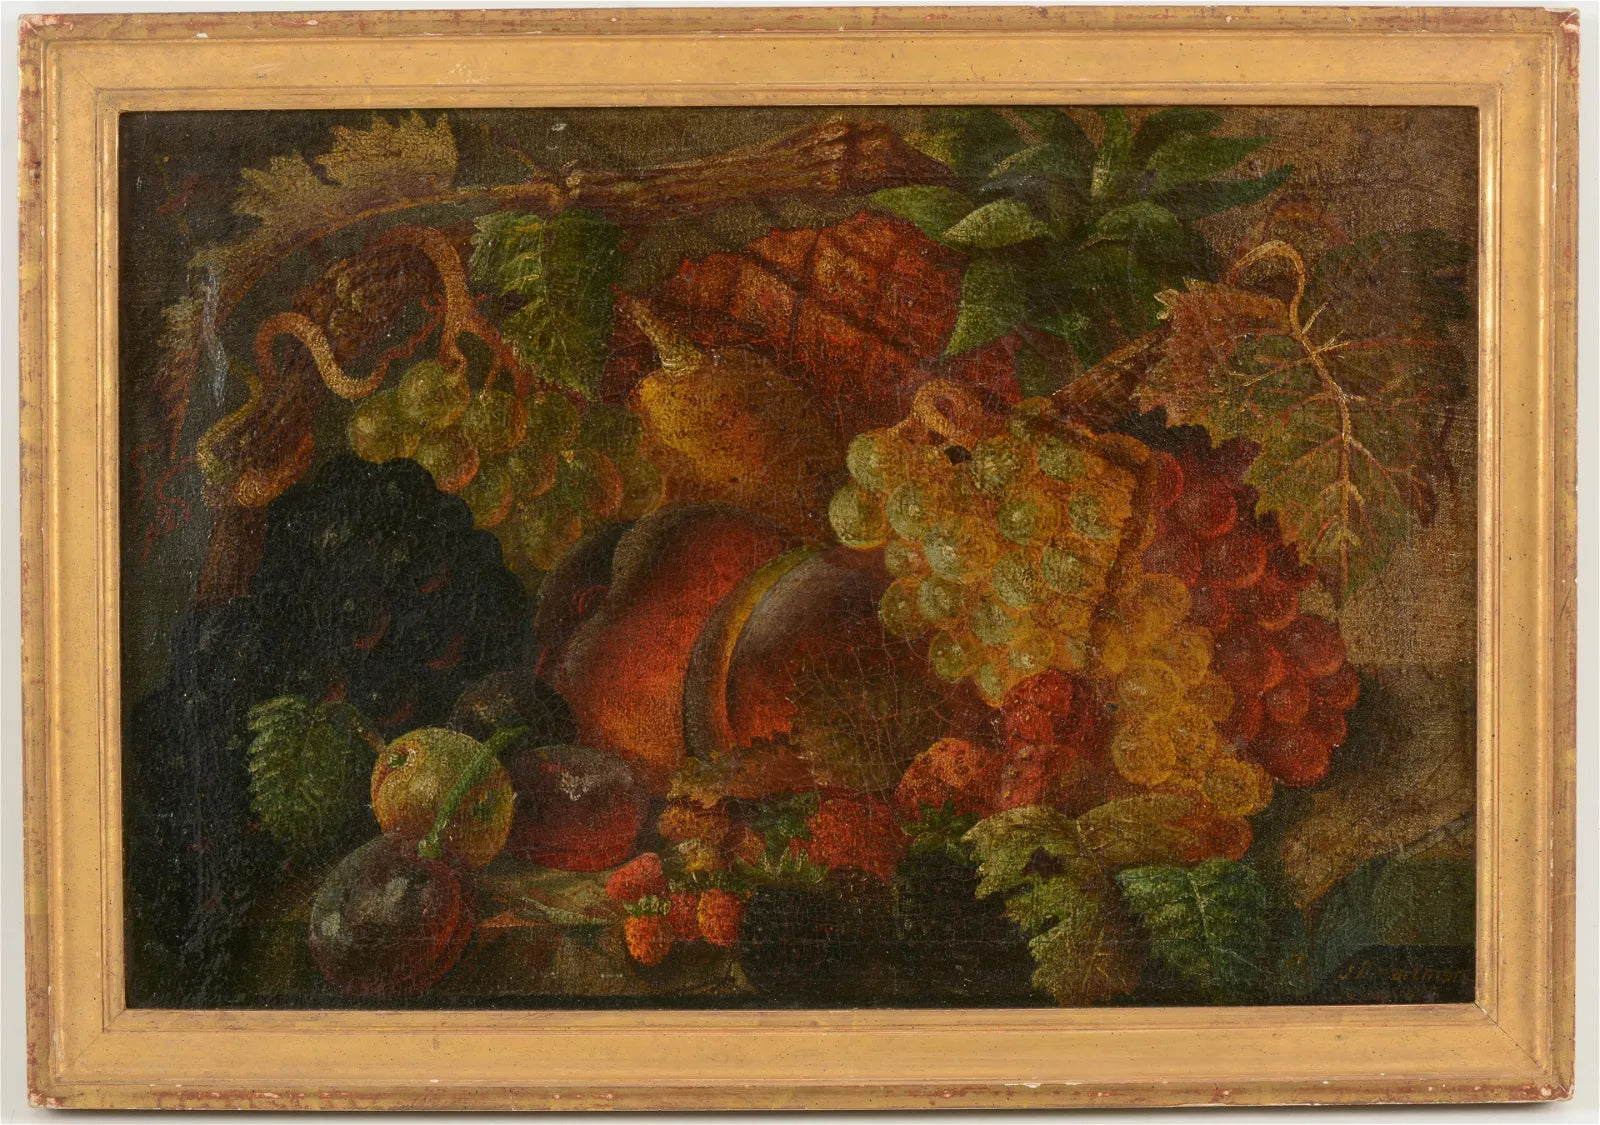 AW587: 19th century American School Still Life With Fruit - Oil on Canvas